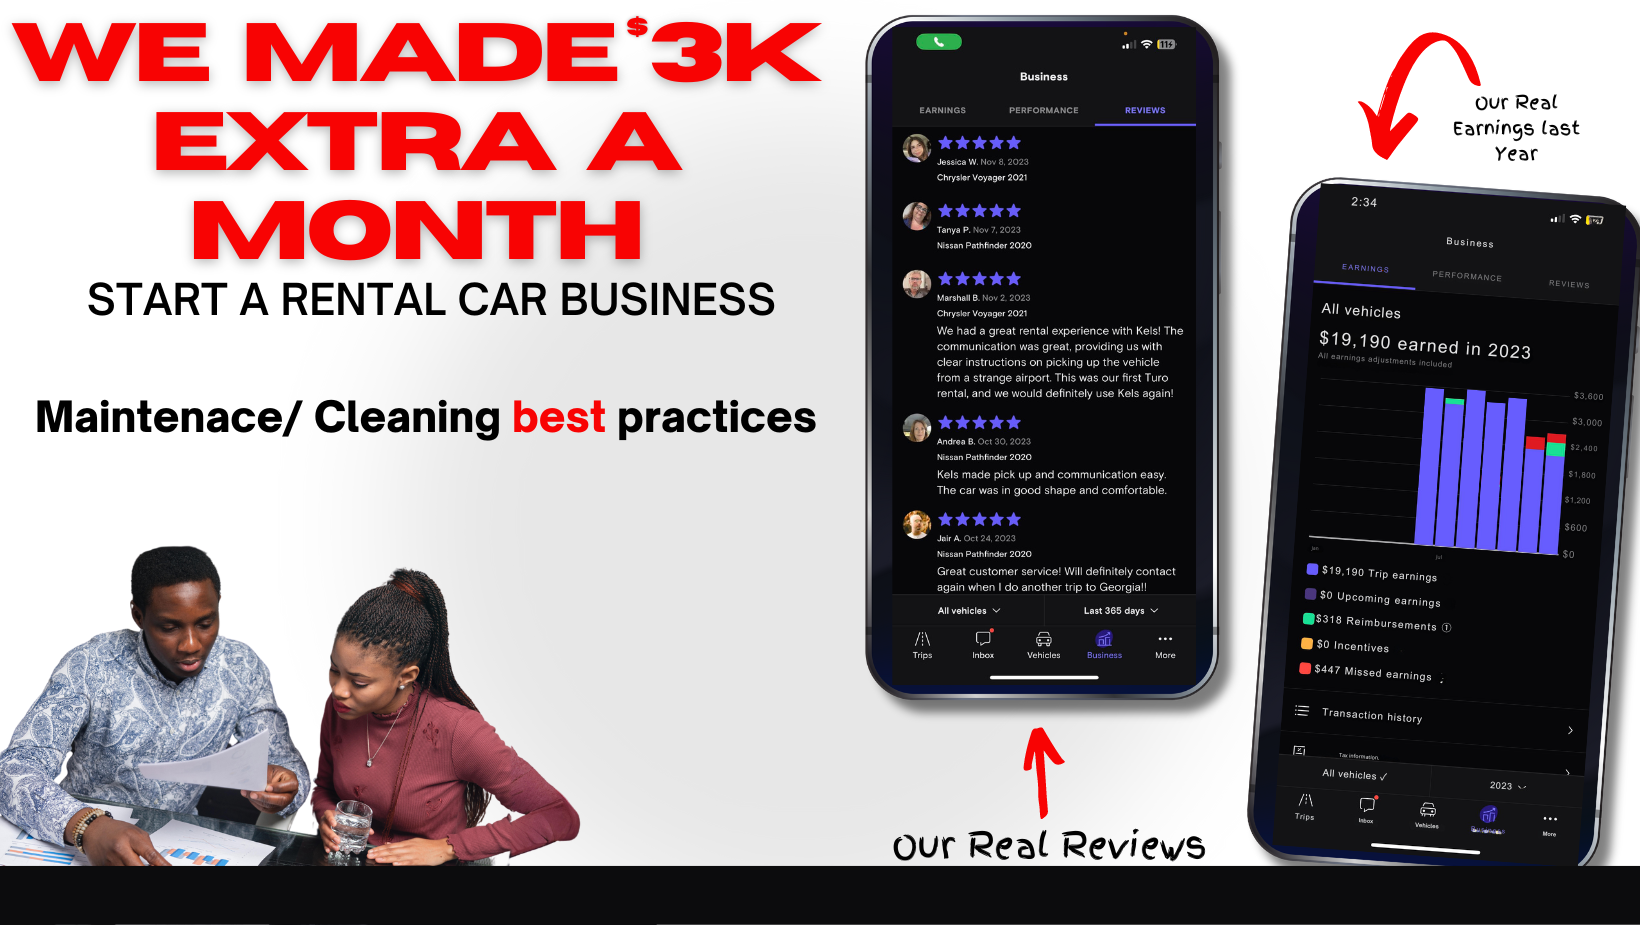 Start a rental car business. We made 3000 a month with our rental car business.